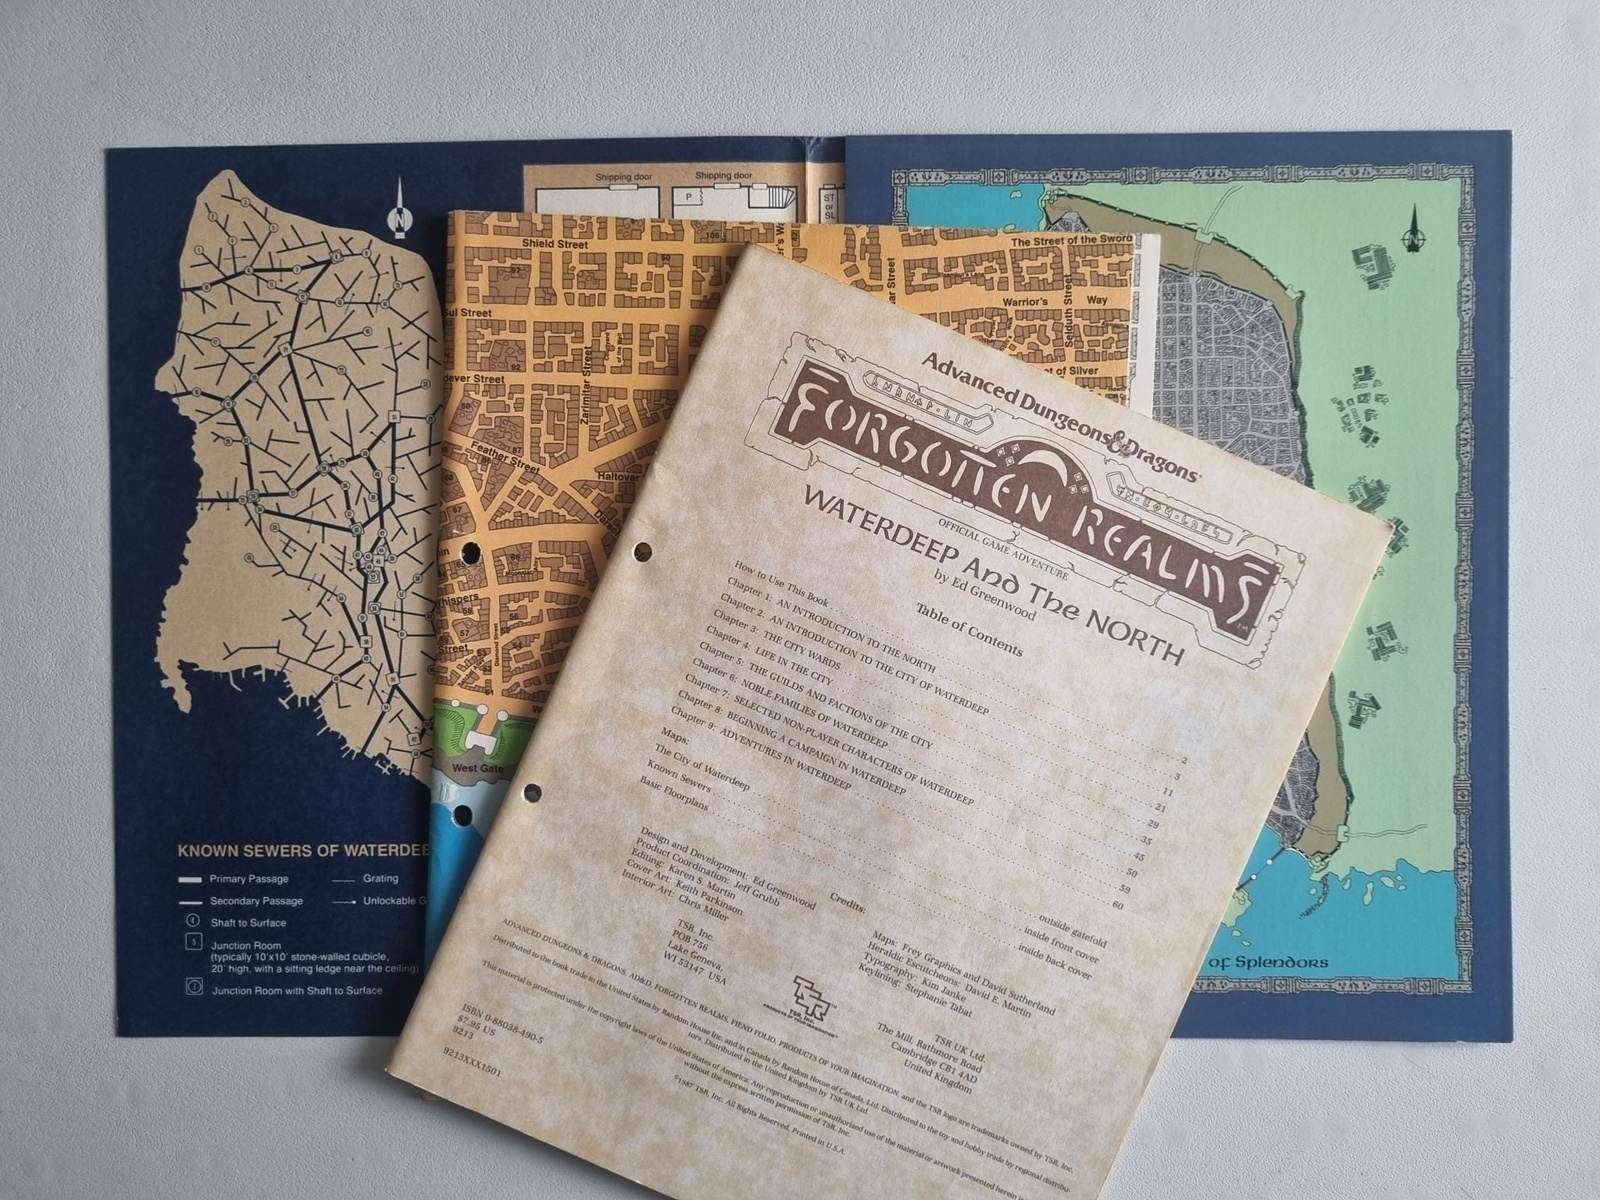 AD&D - Forgotten Realms - Waterdeep and the North (FR1 9213) Default Title